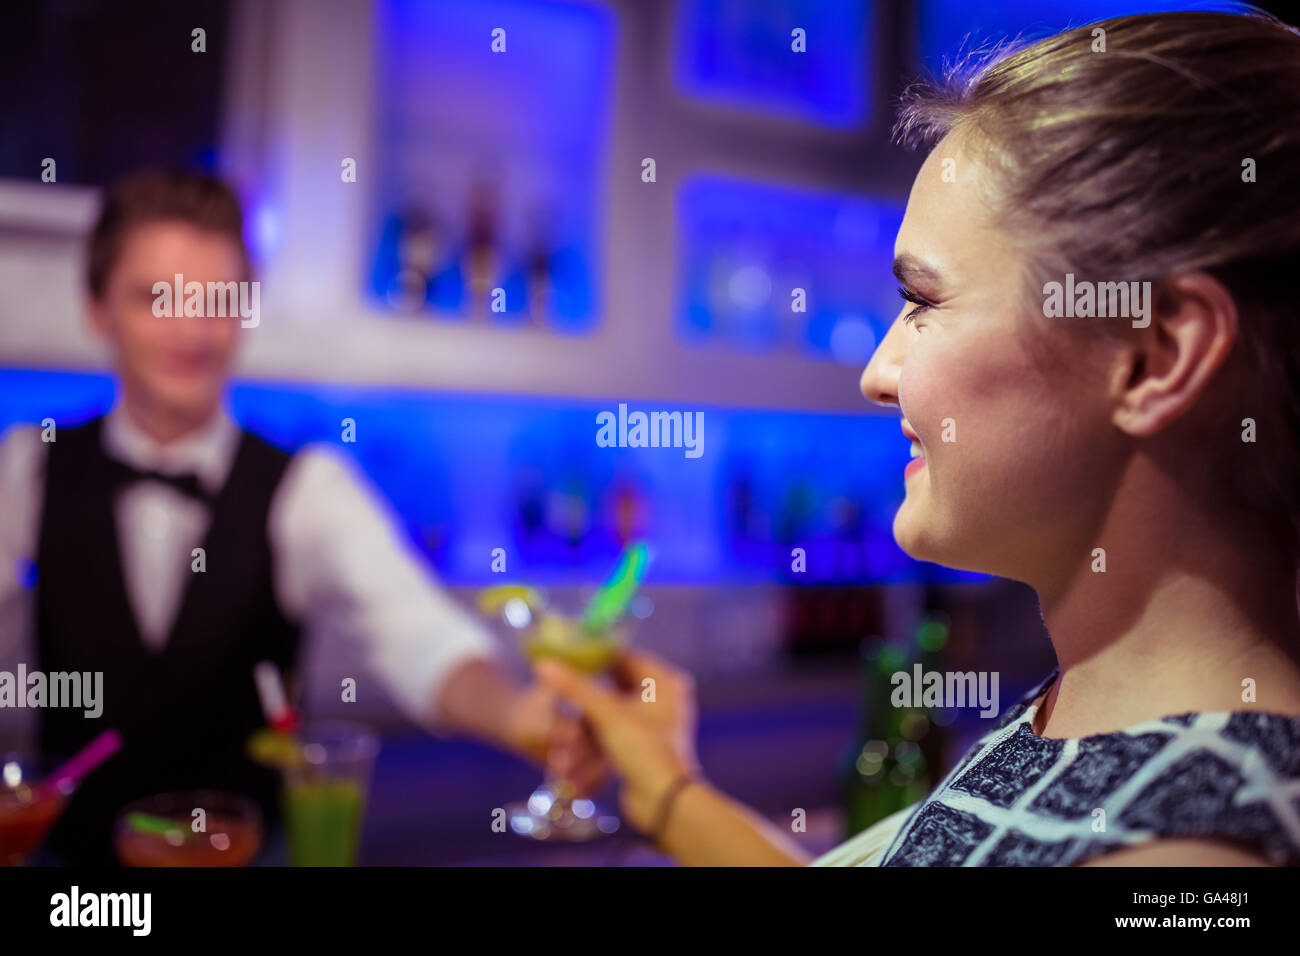 Barman serving cocktail to woman Stock Photo